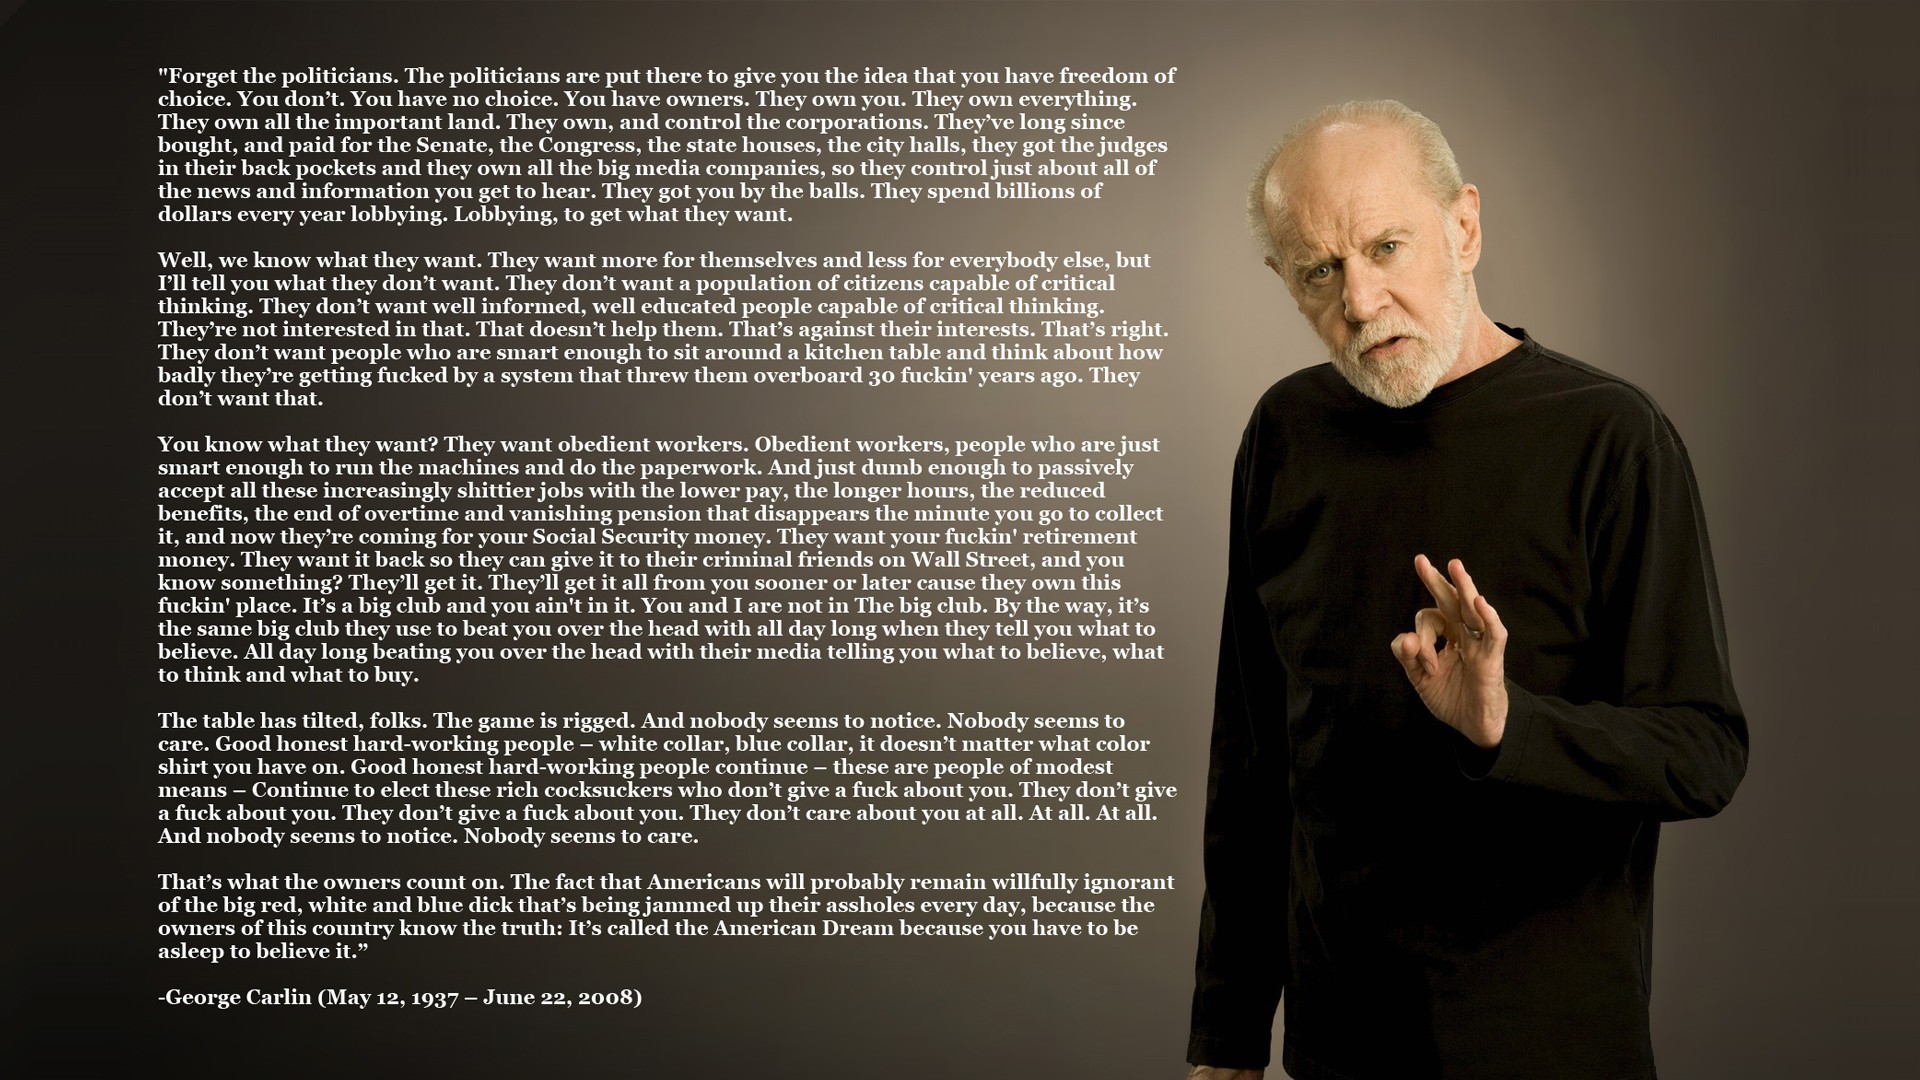 General 1920x1080 George Carlin quote text men